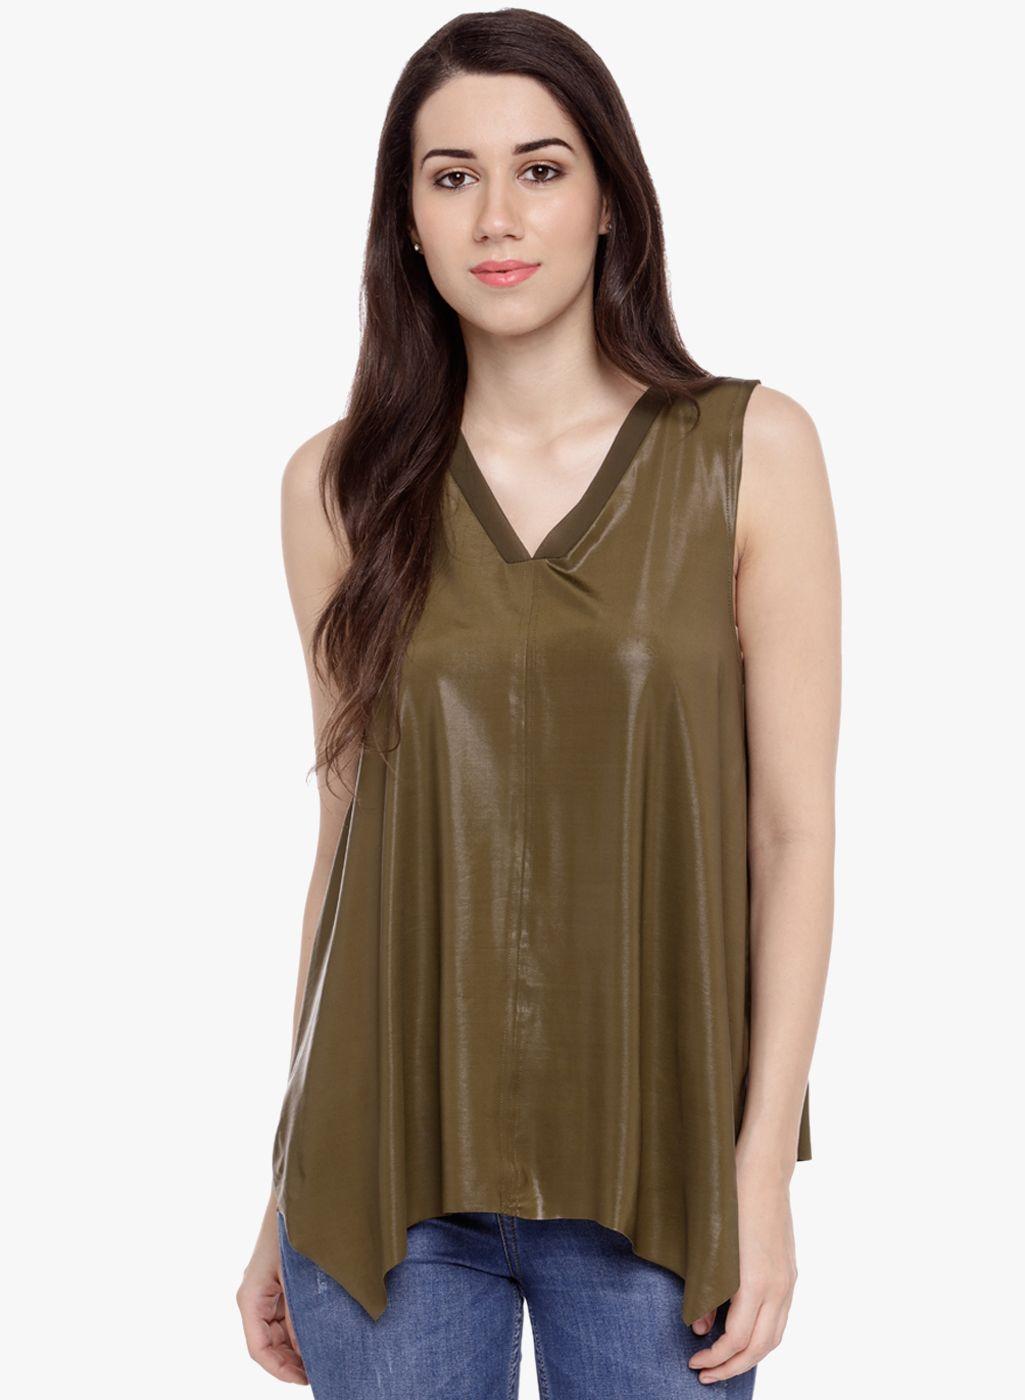 annabelle by pantaloons women olive green solid top